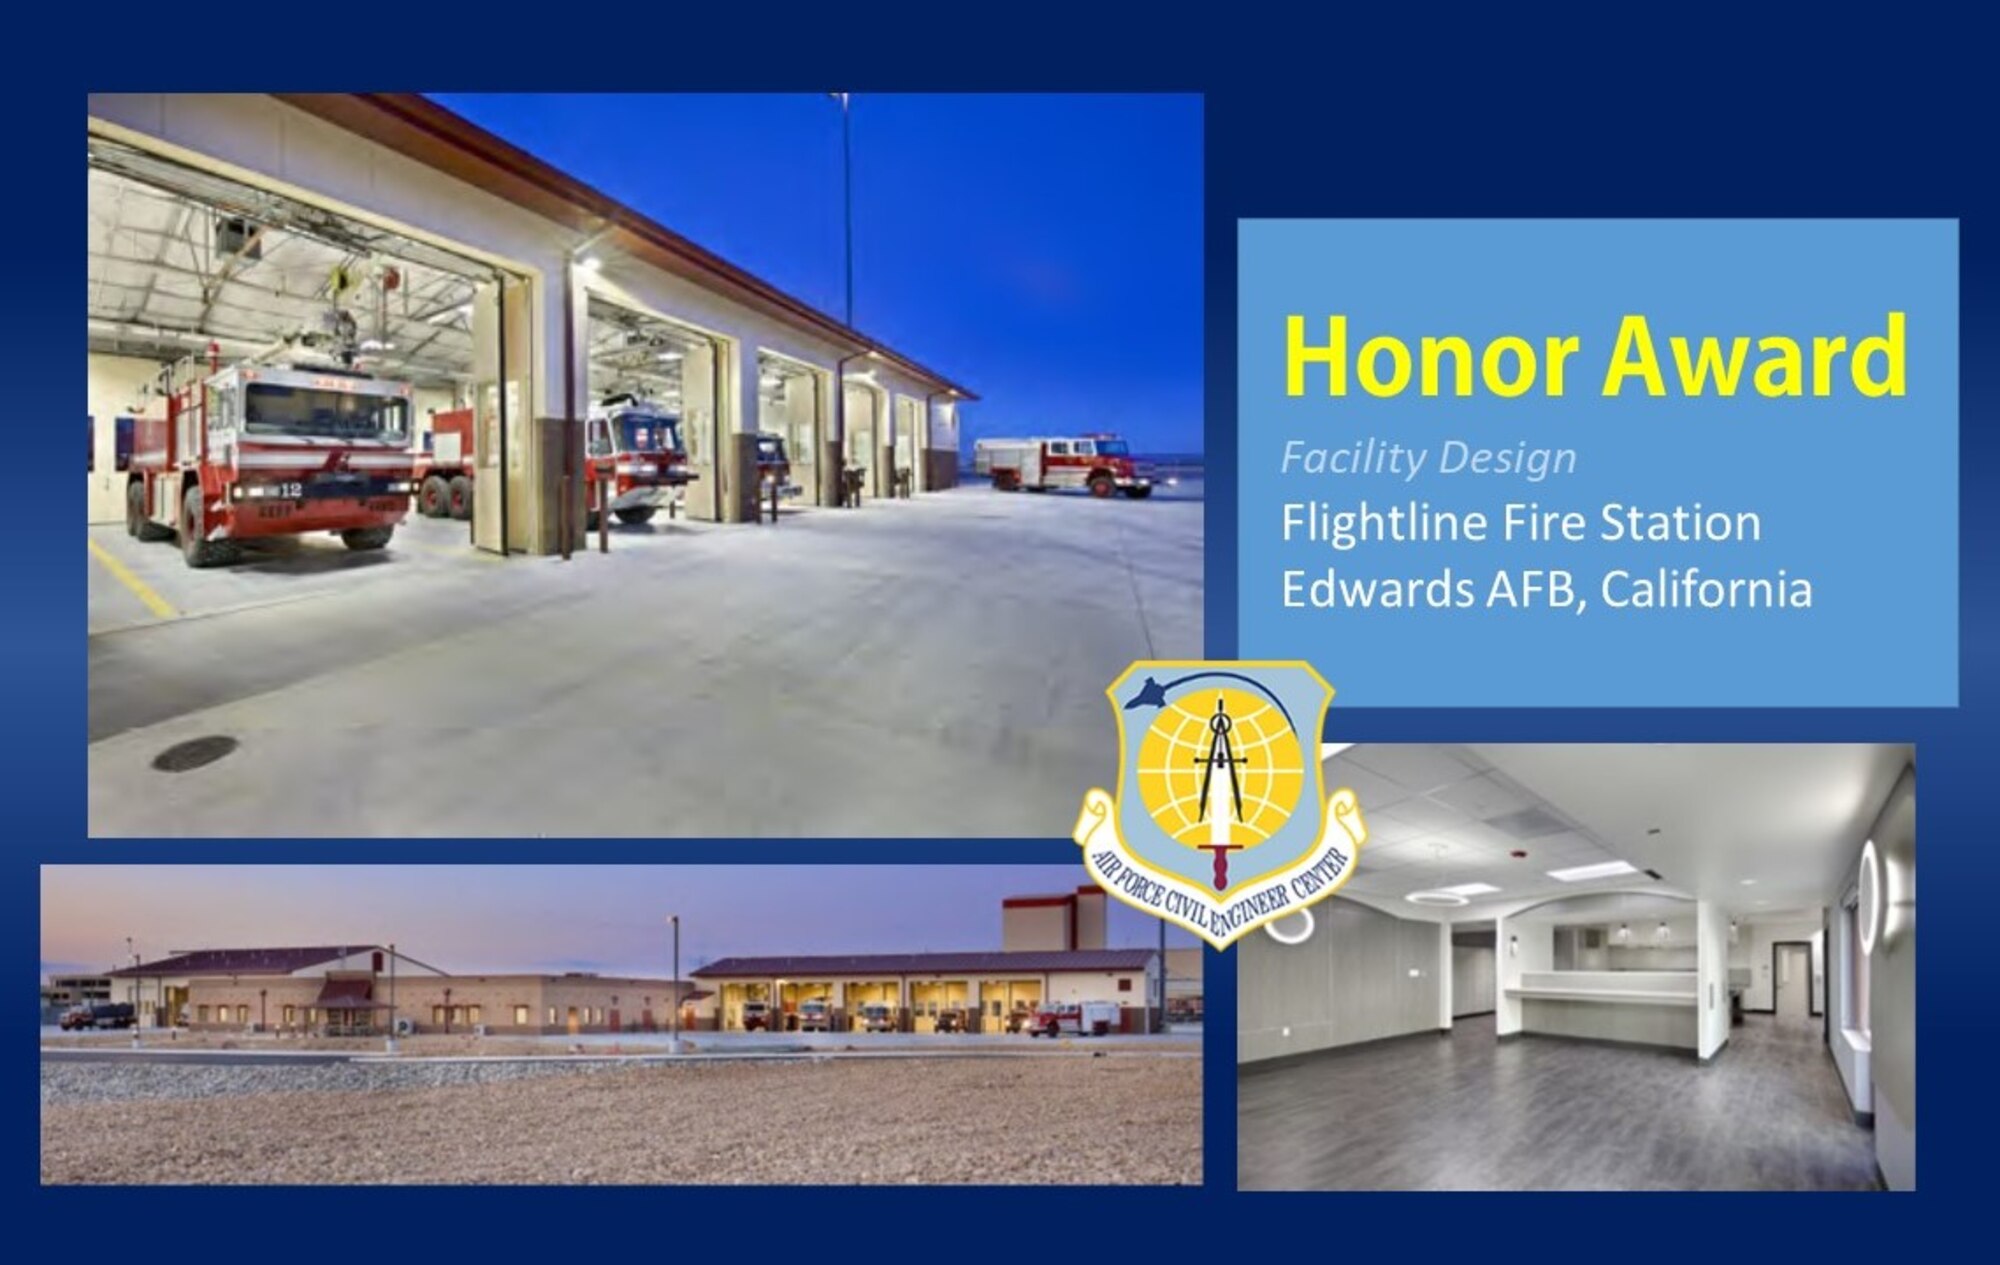 2020 Design Honor Award in the facility design category is the Flightline Fire Station at Edwards AFB, California. (U.S. Air Force graphic)